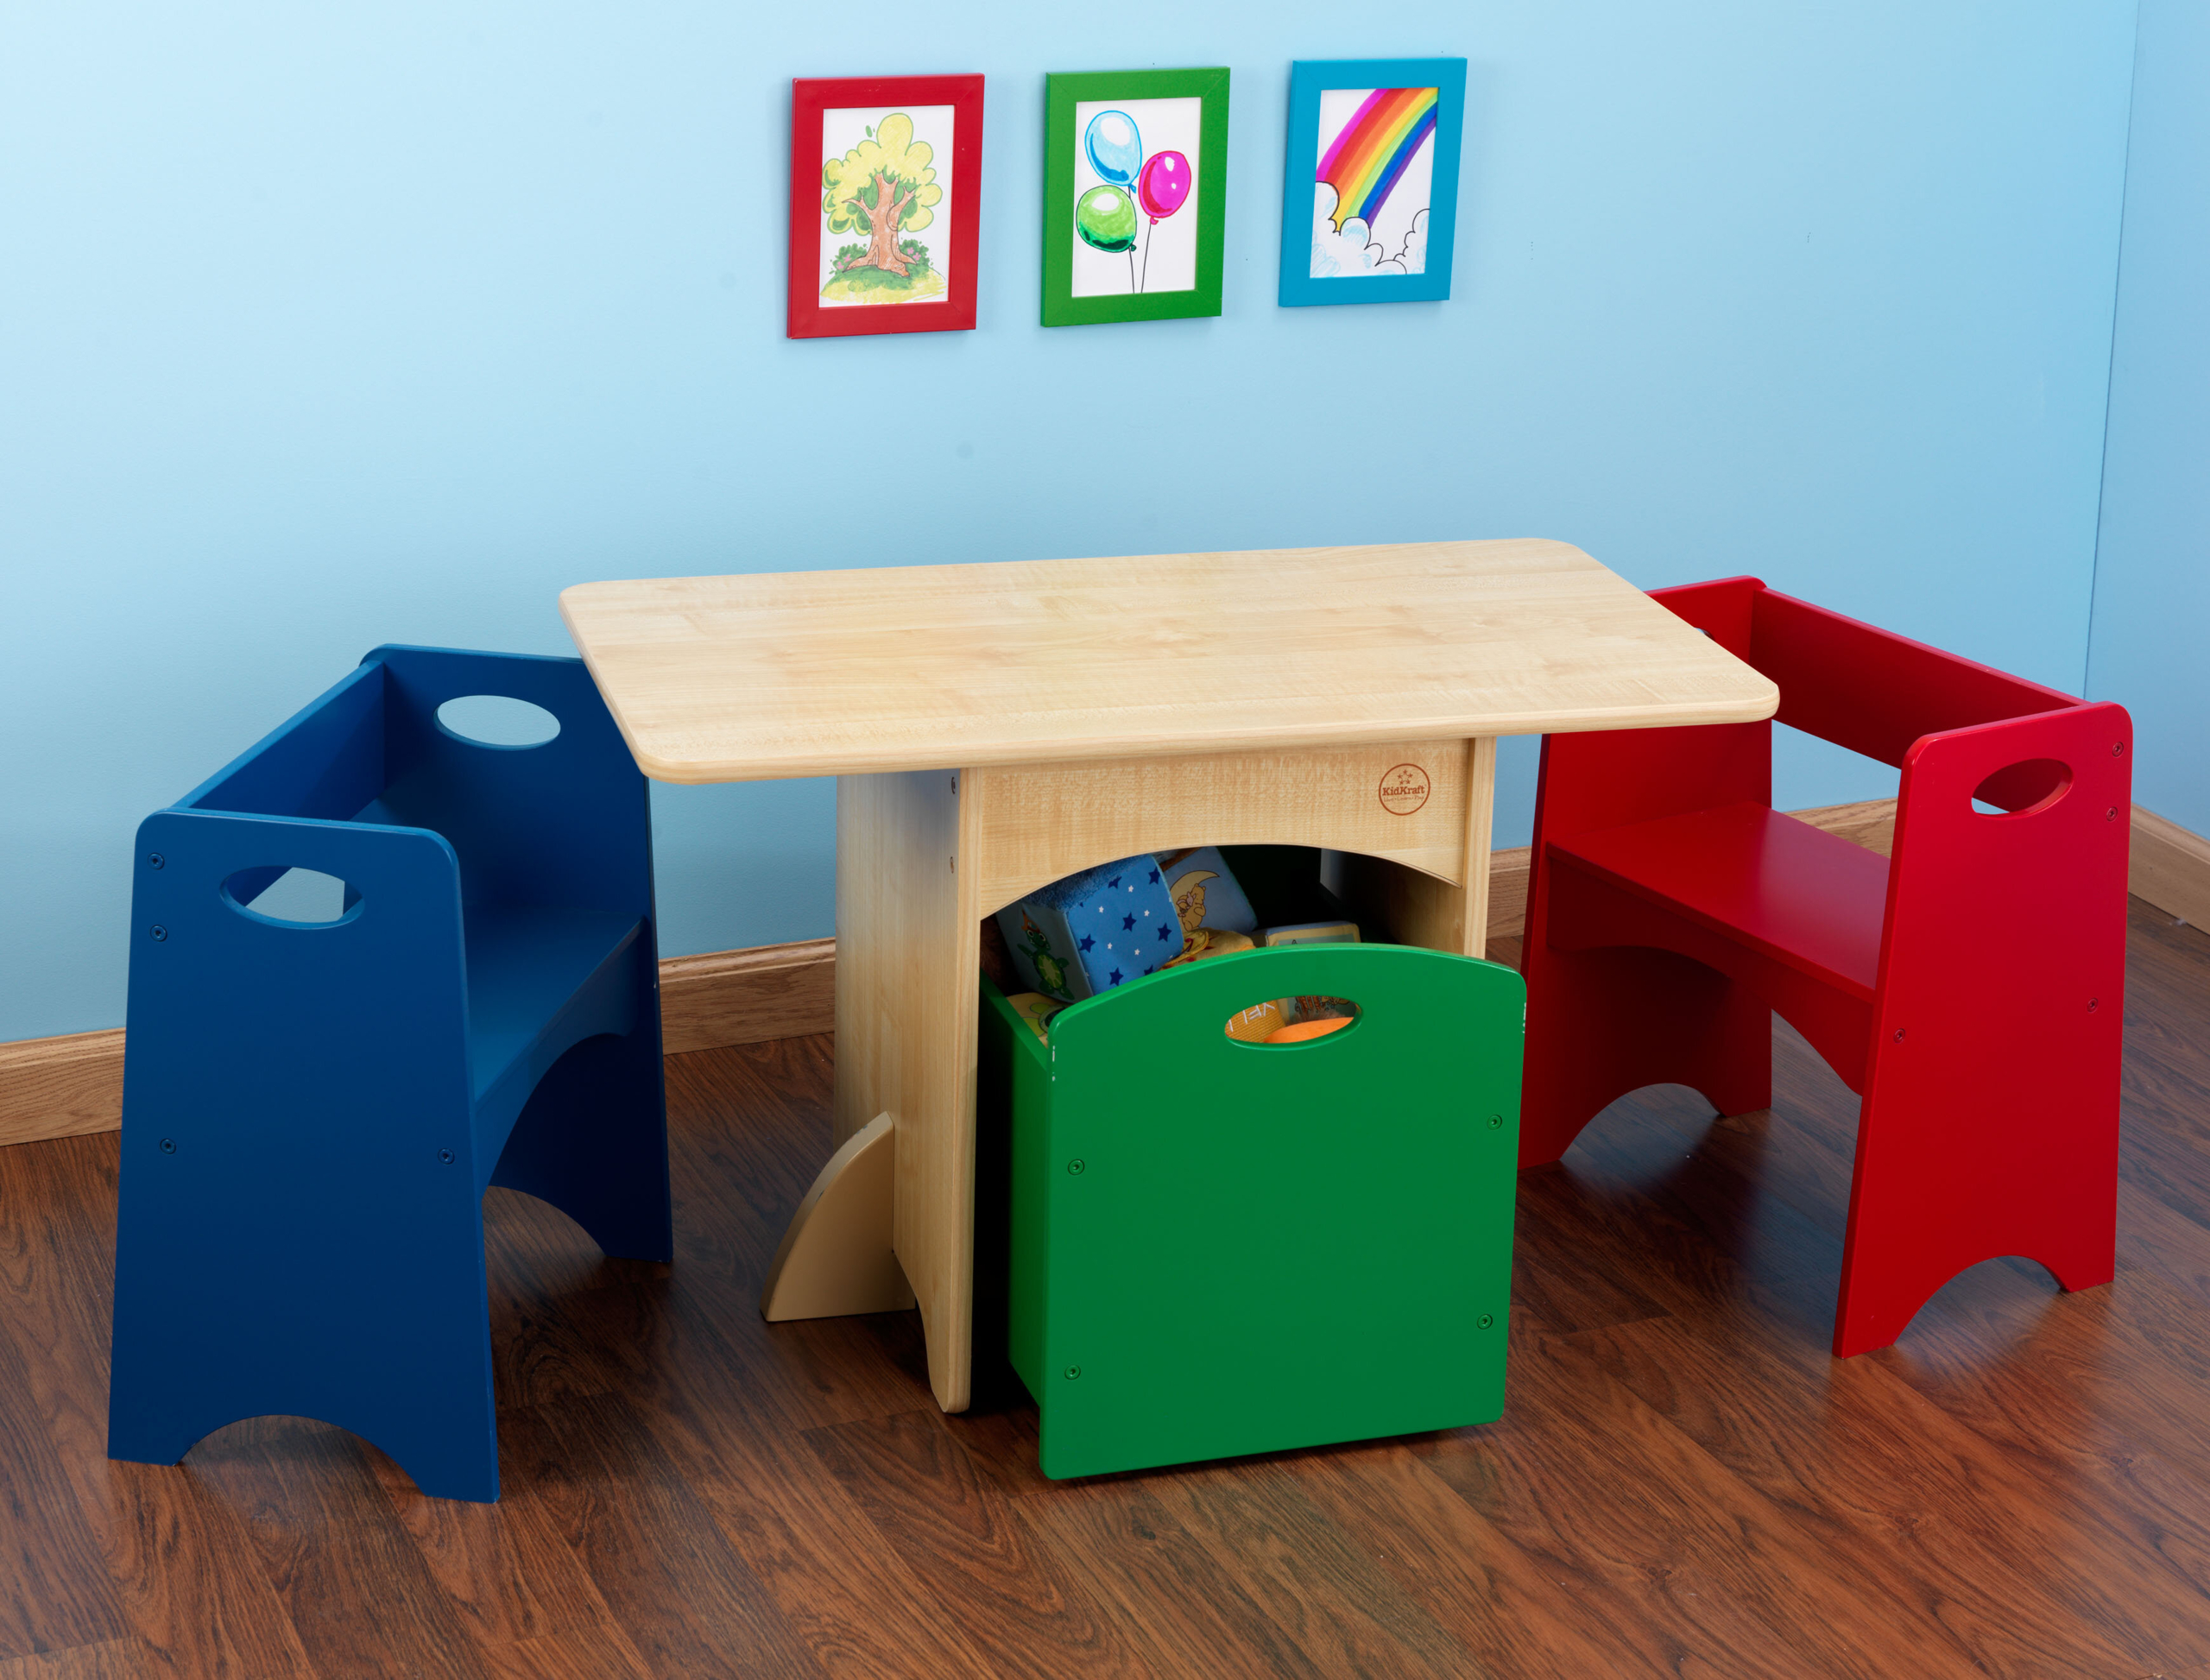 Wooden chairs for children